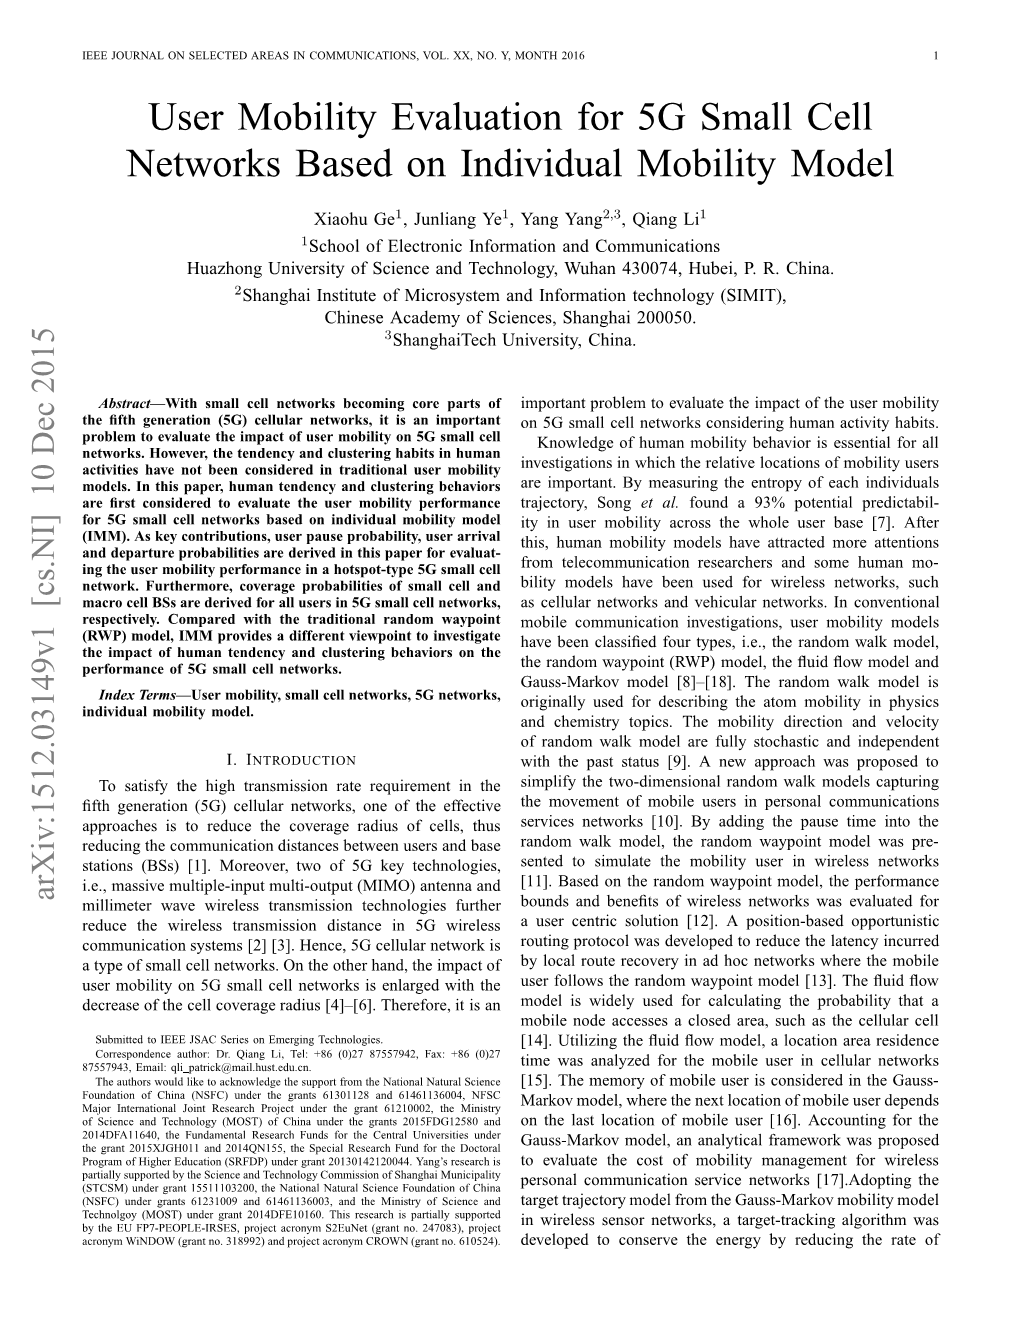 User Mobility Evaluation for 5G Small Cell Networks Based on Individual